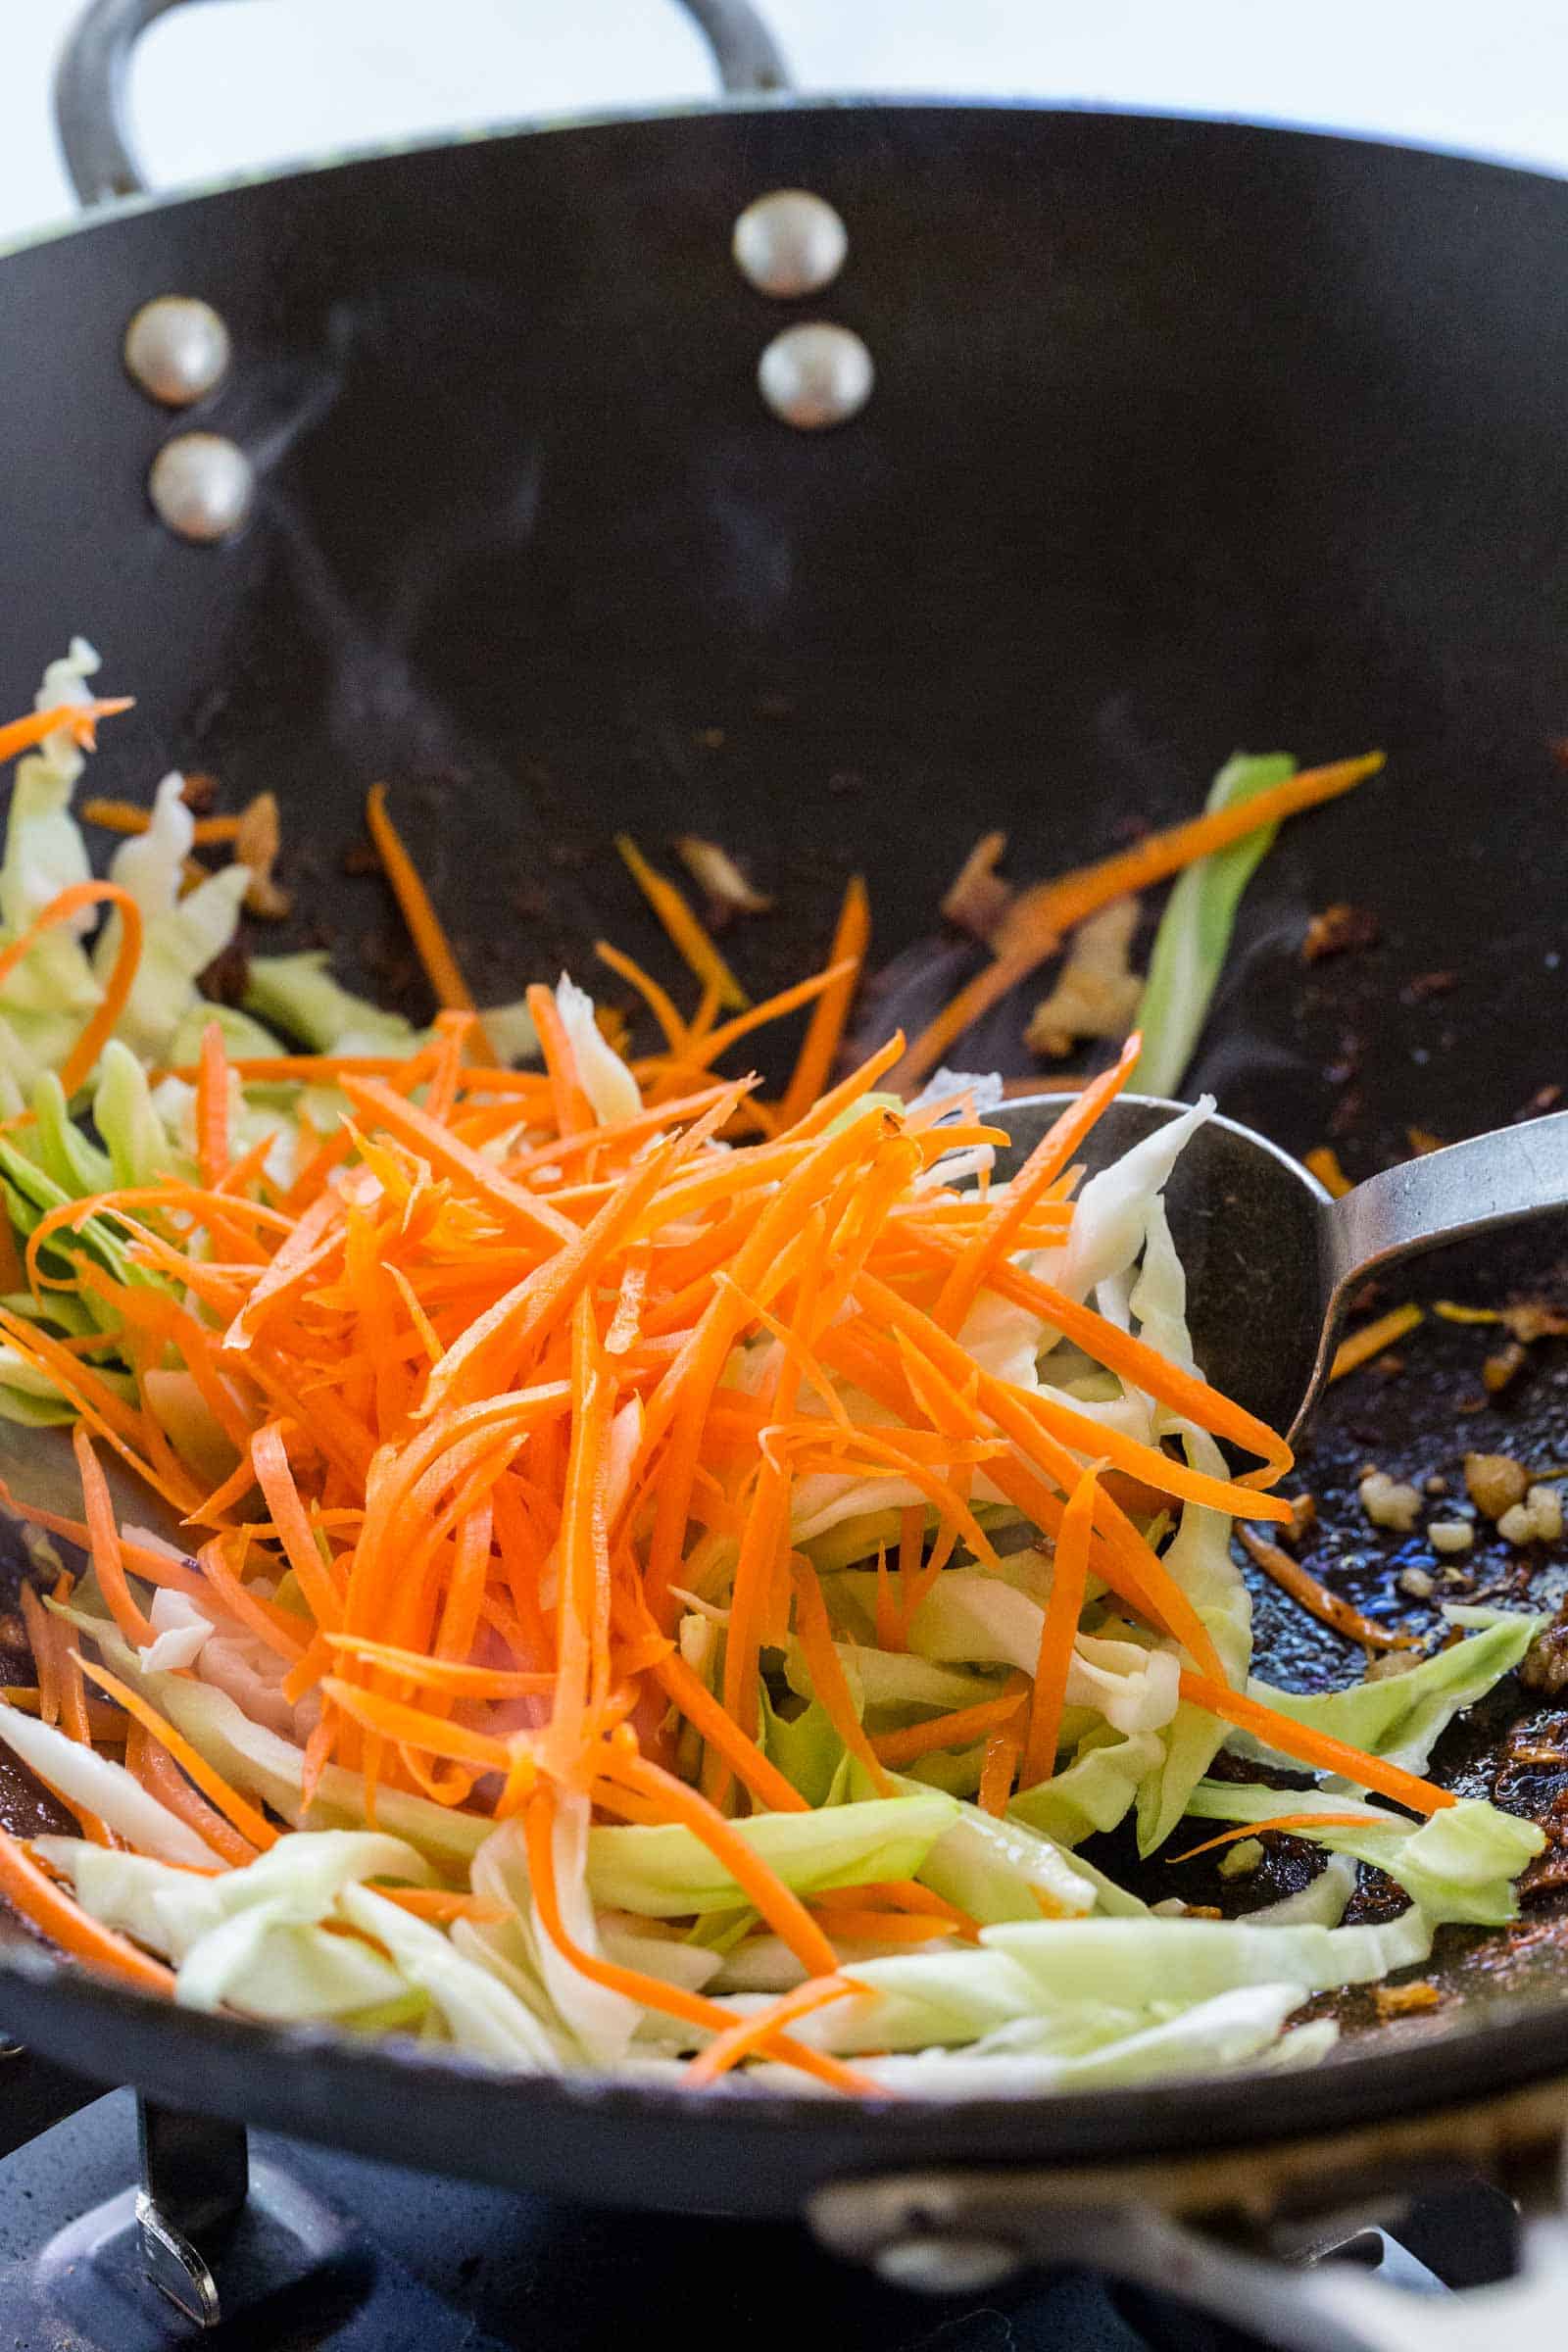 stir frying sliced carrots and cabbage in a wok